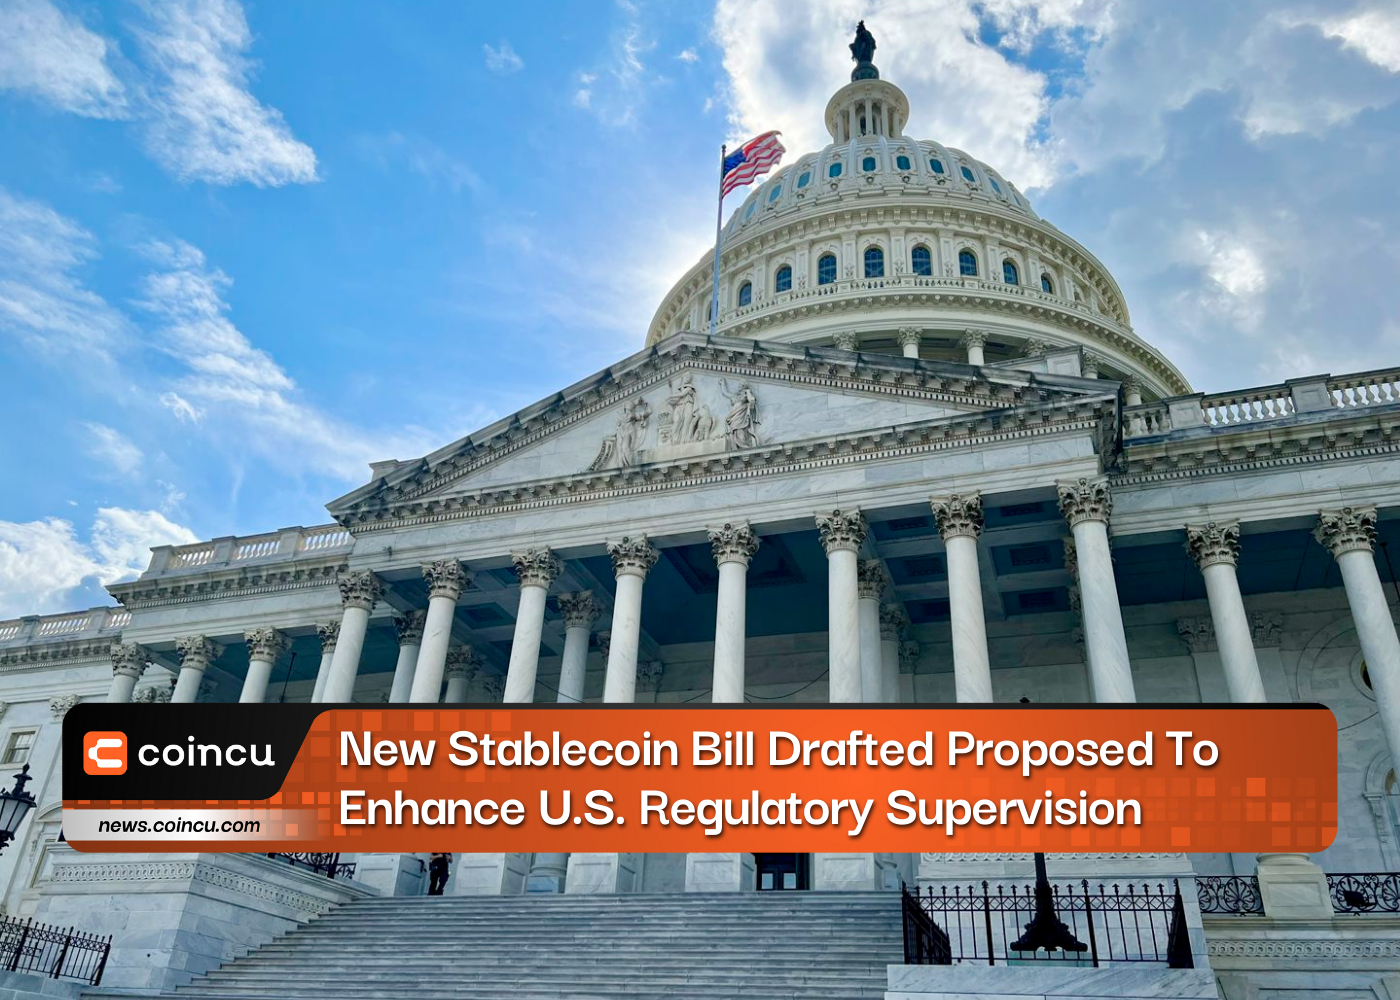 New Stablecoin Bill Drafted Proposed To Enhance U.S. Regulatory Supervision